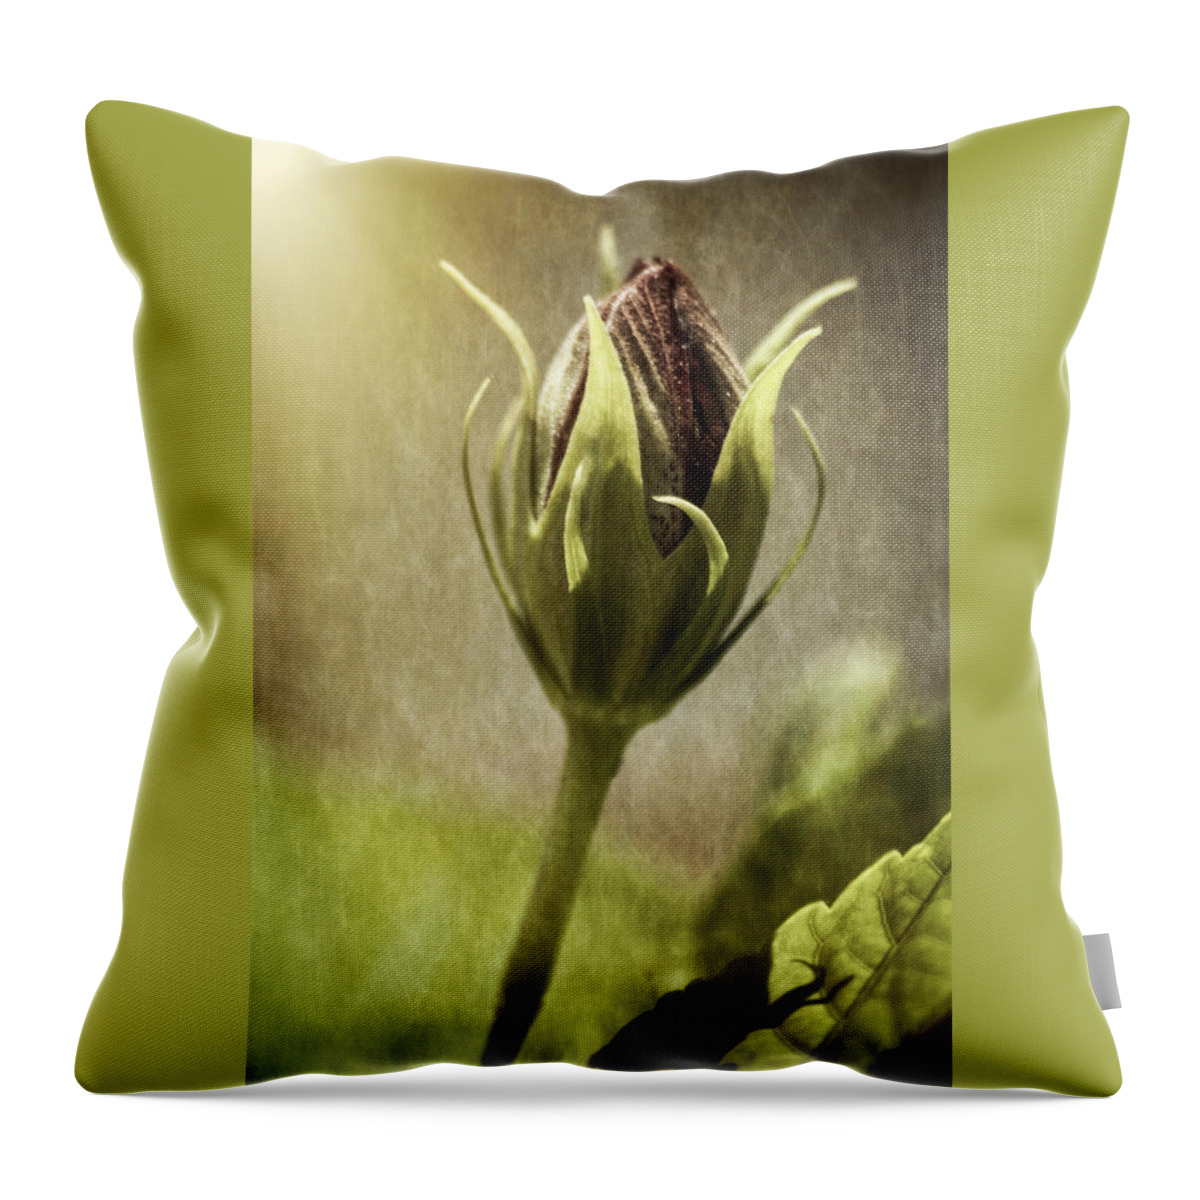 Rose Throw Pillow featuring the photograph Before Full Bloom by Carolyn Marshall